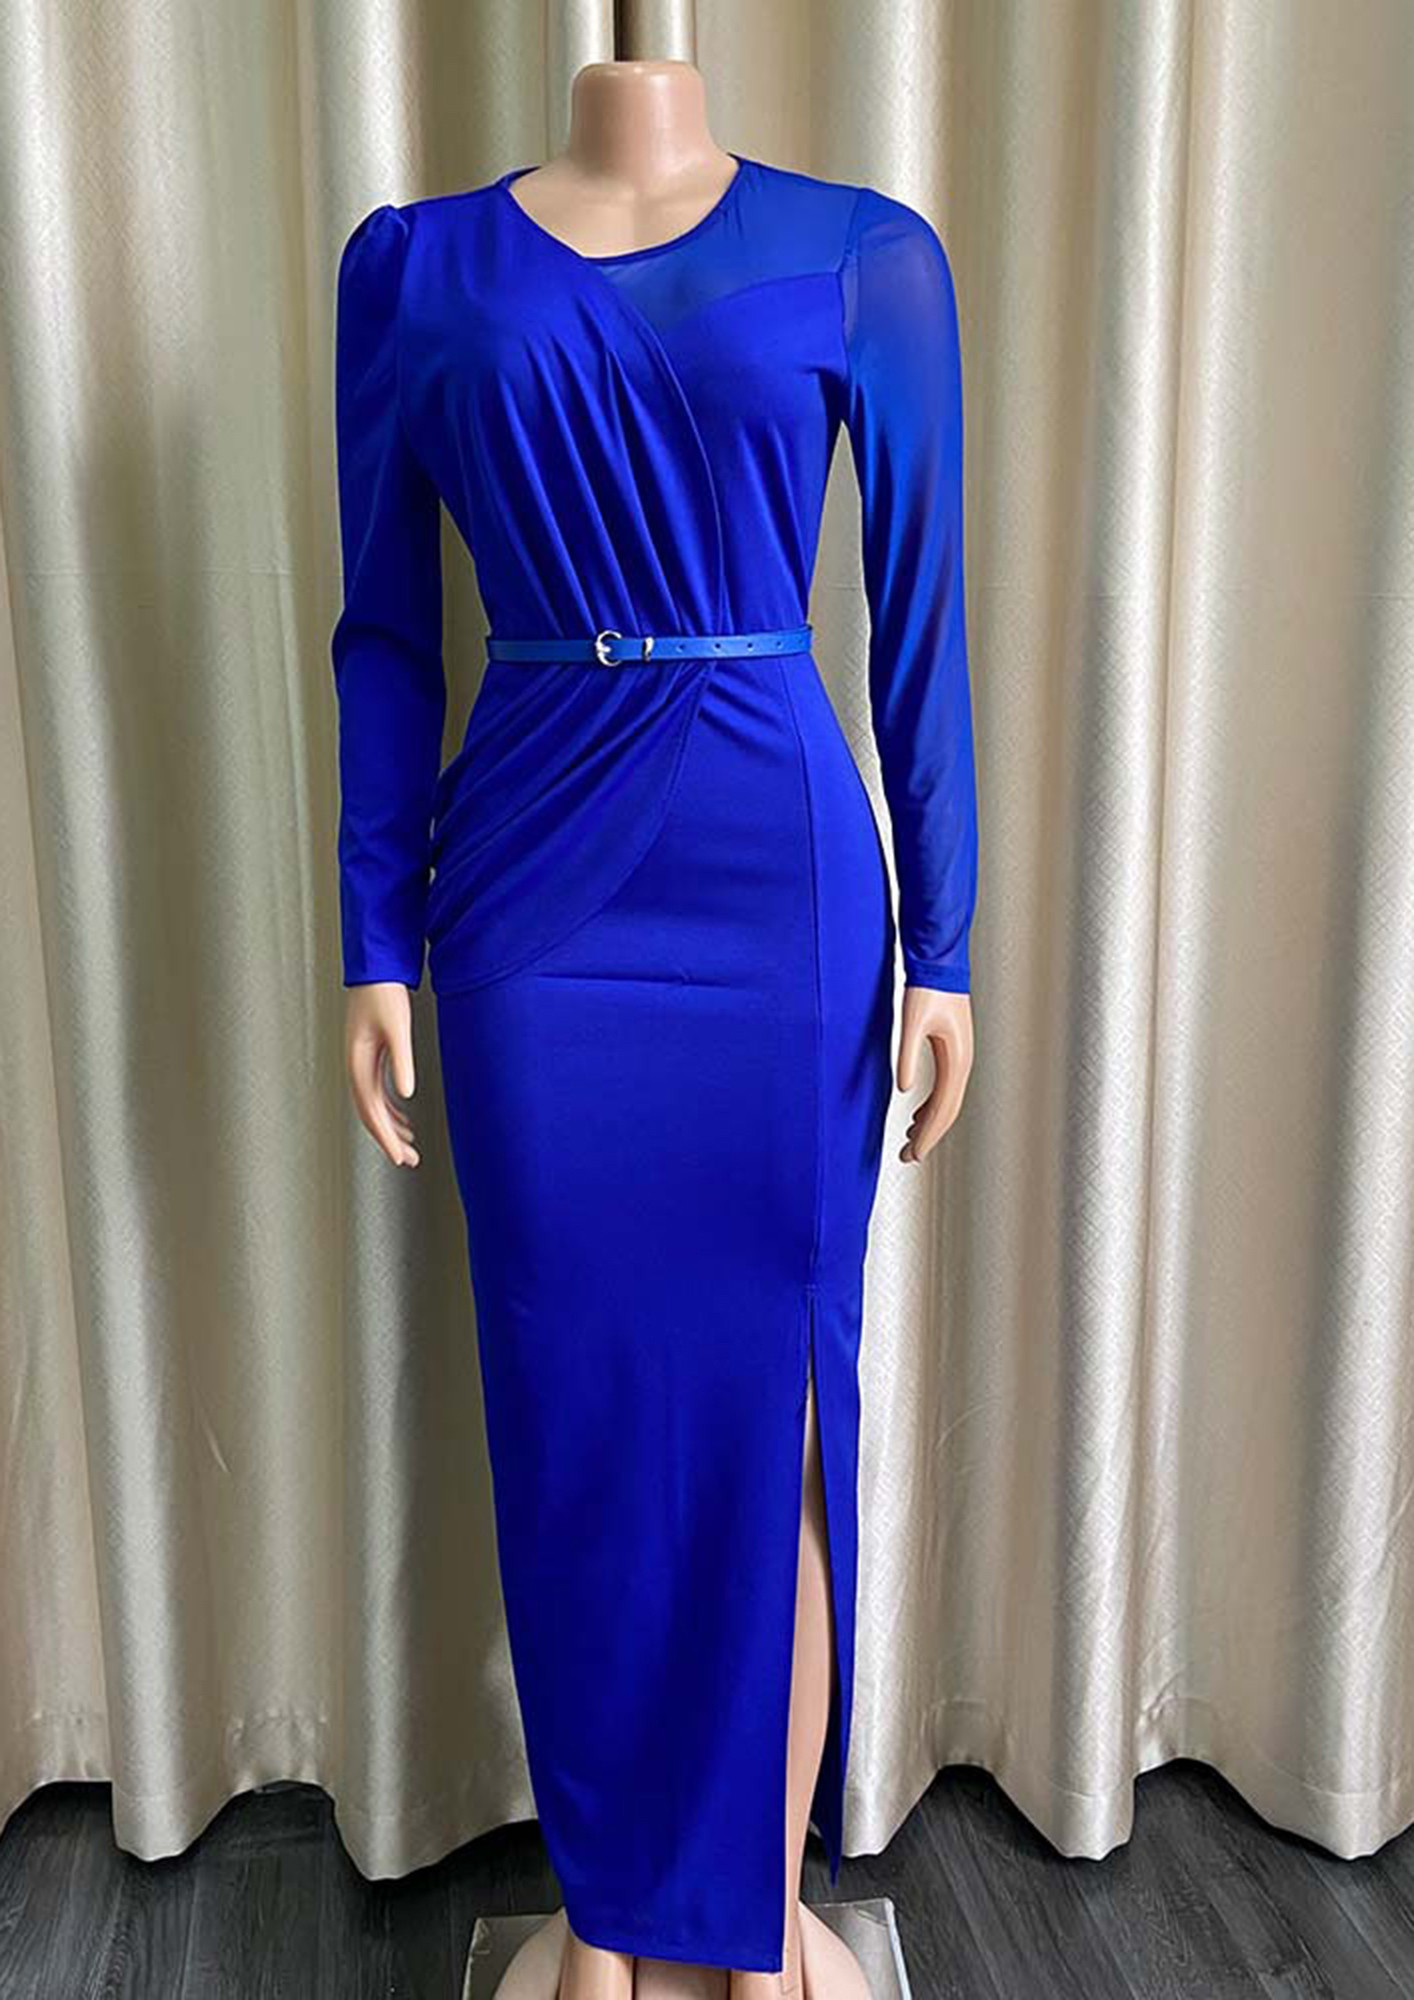 ROUND NECK BELTED MAXI BLUE BODYCON DRESS